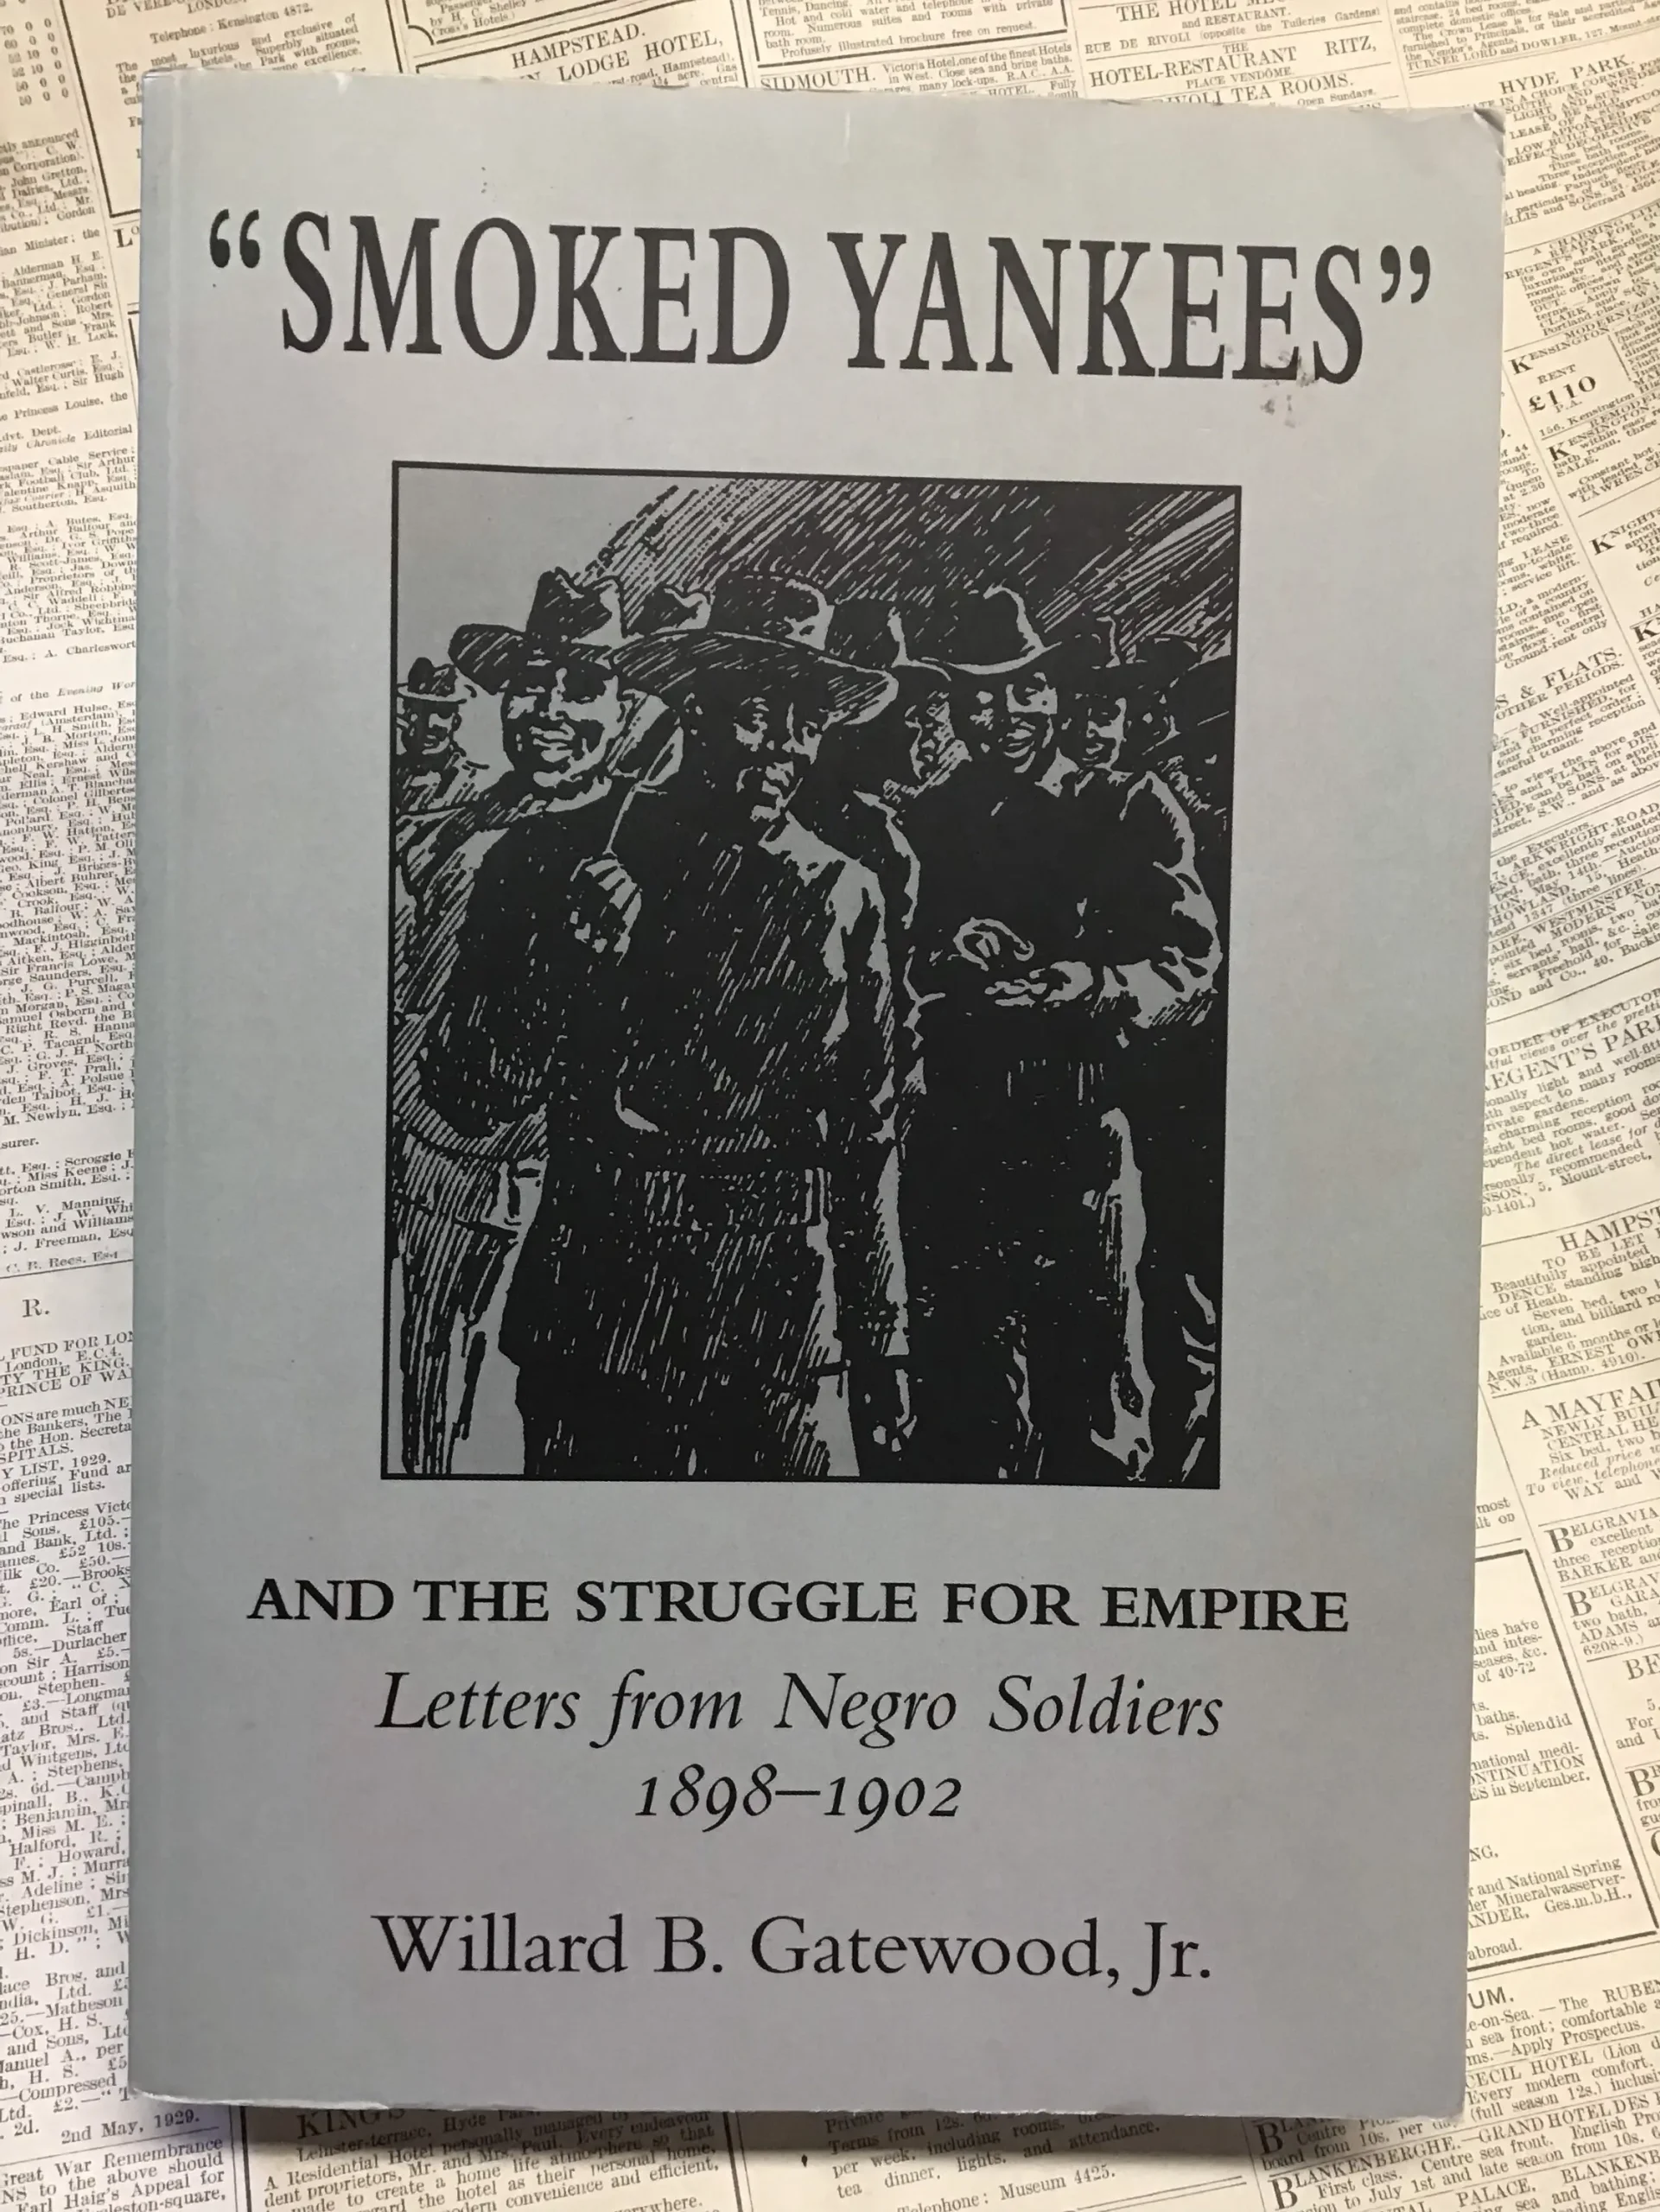 smoked yankees - Why are Americans called Yankees